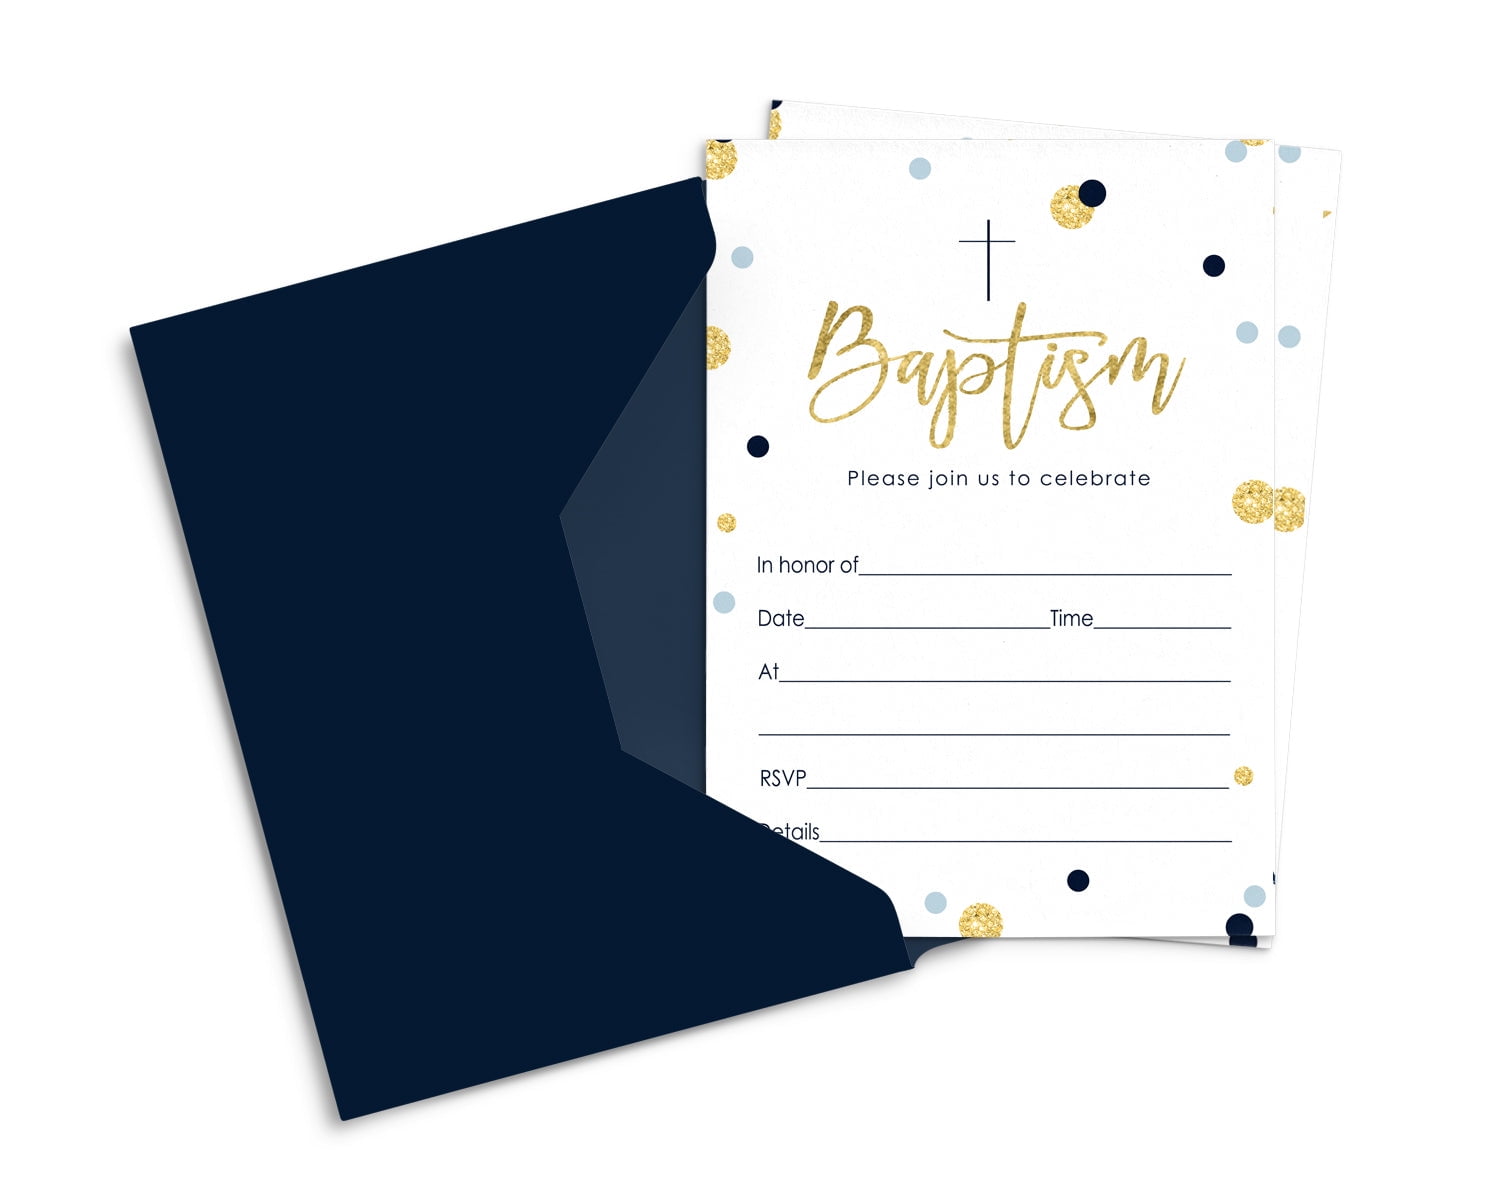 Gold and Black Invitations and Envelopes Pack of 25 Fill In Blank Invites  for Graduation Retirement Birthday Baby Shower Engagement Elegant Events